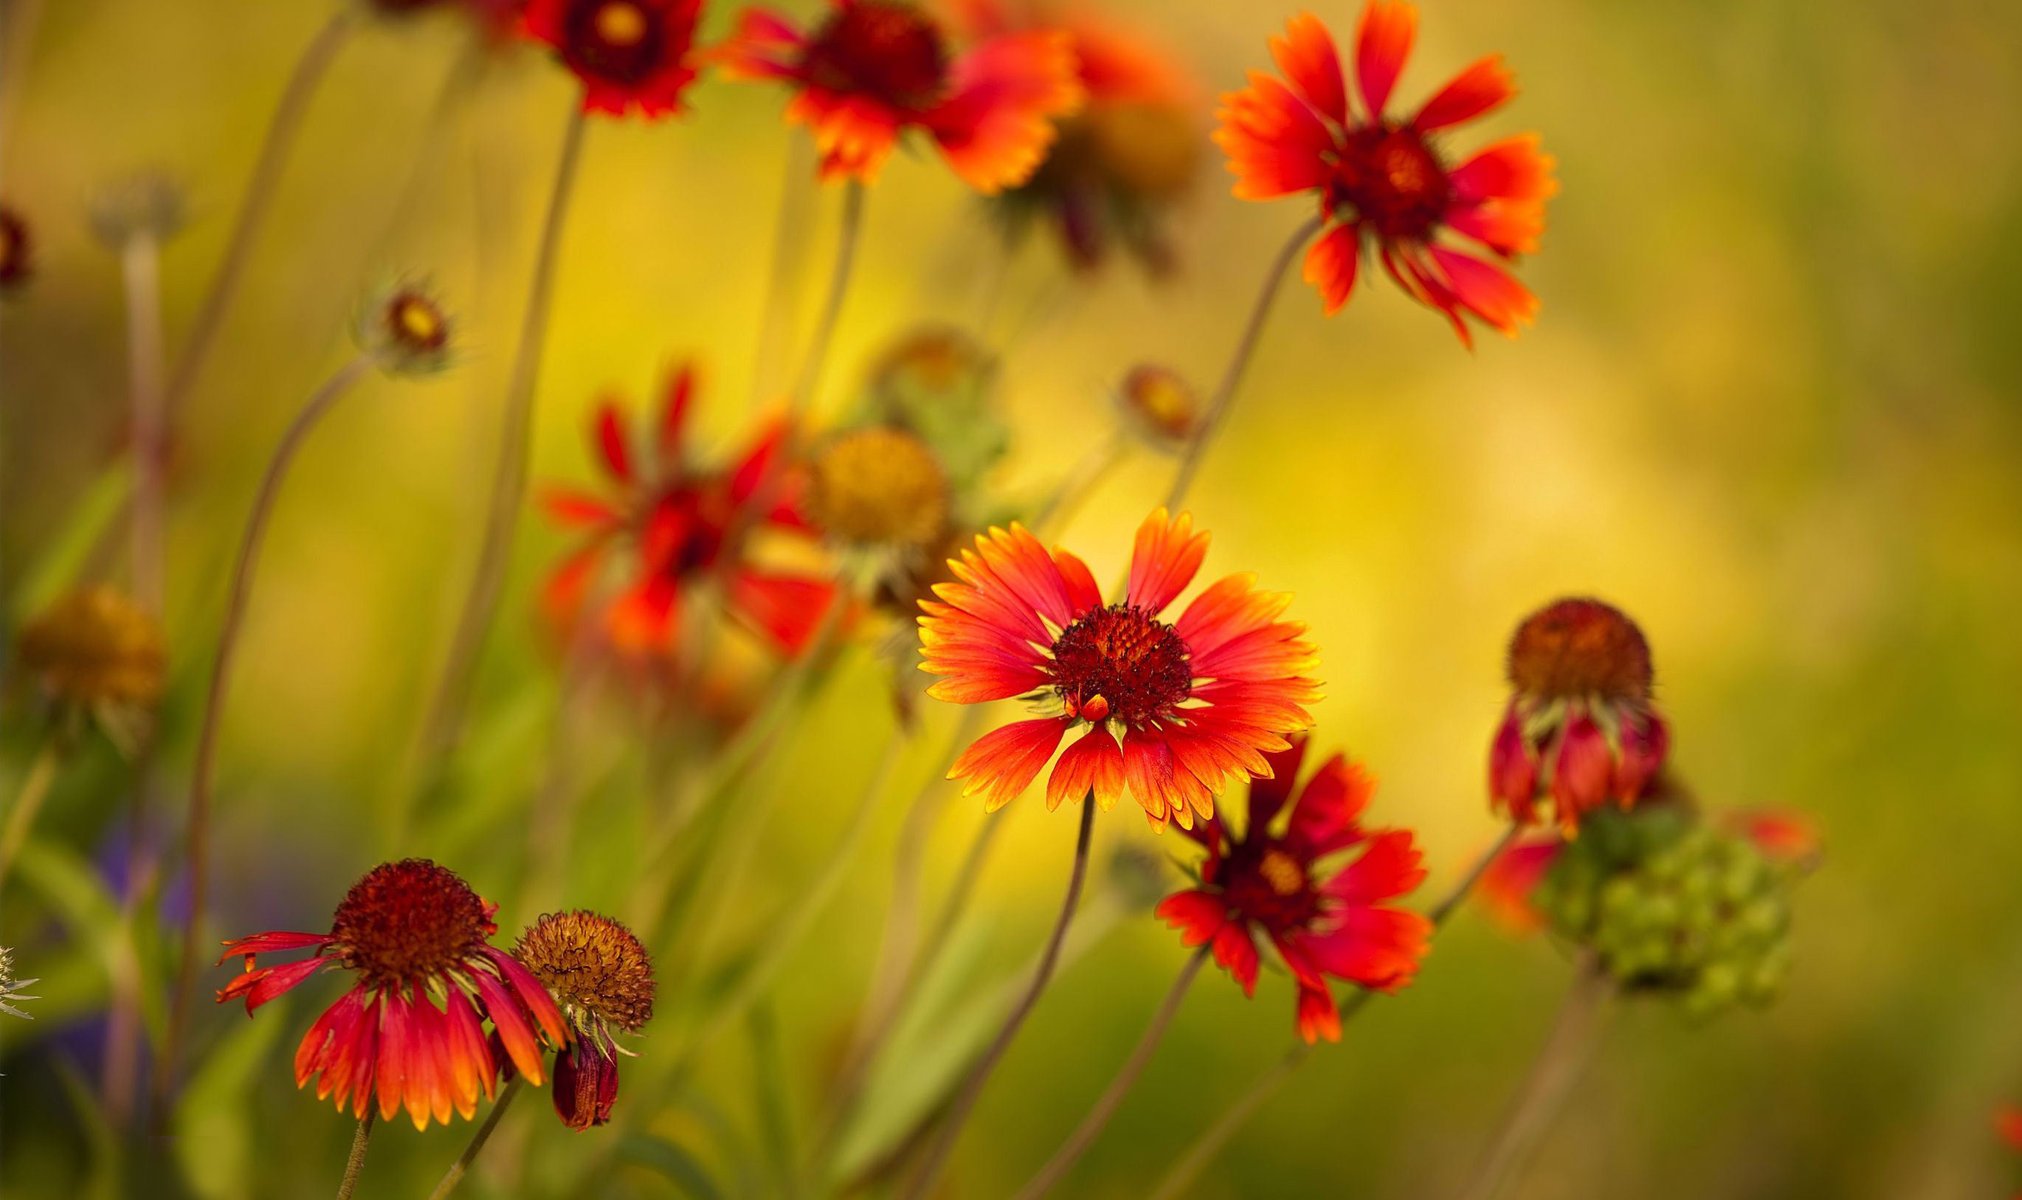 Bright red wildflowers